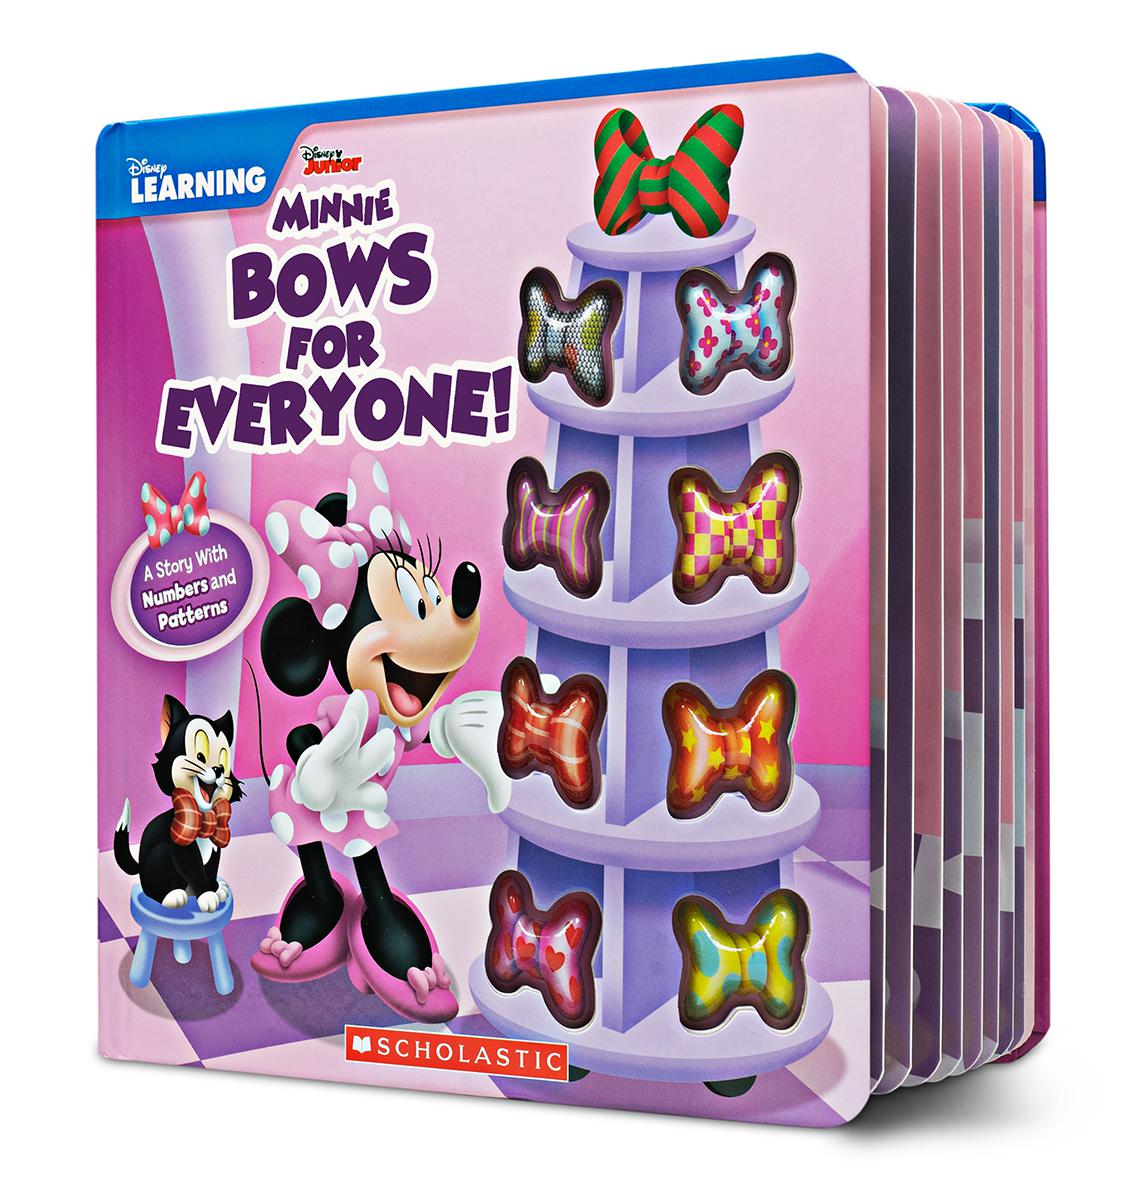  Disney Learning: Minnie: Bows for everyone! 